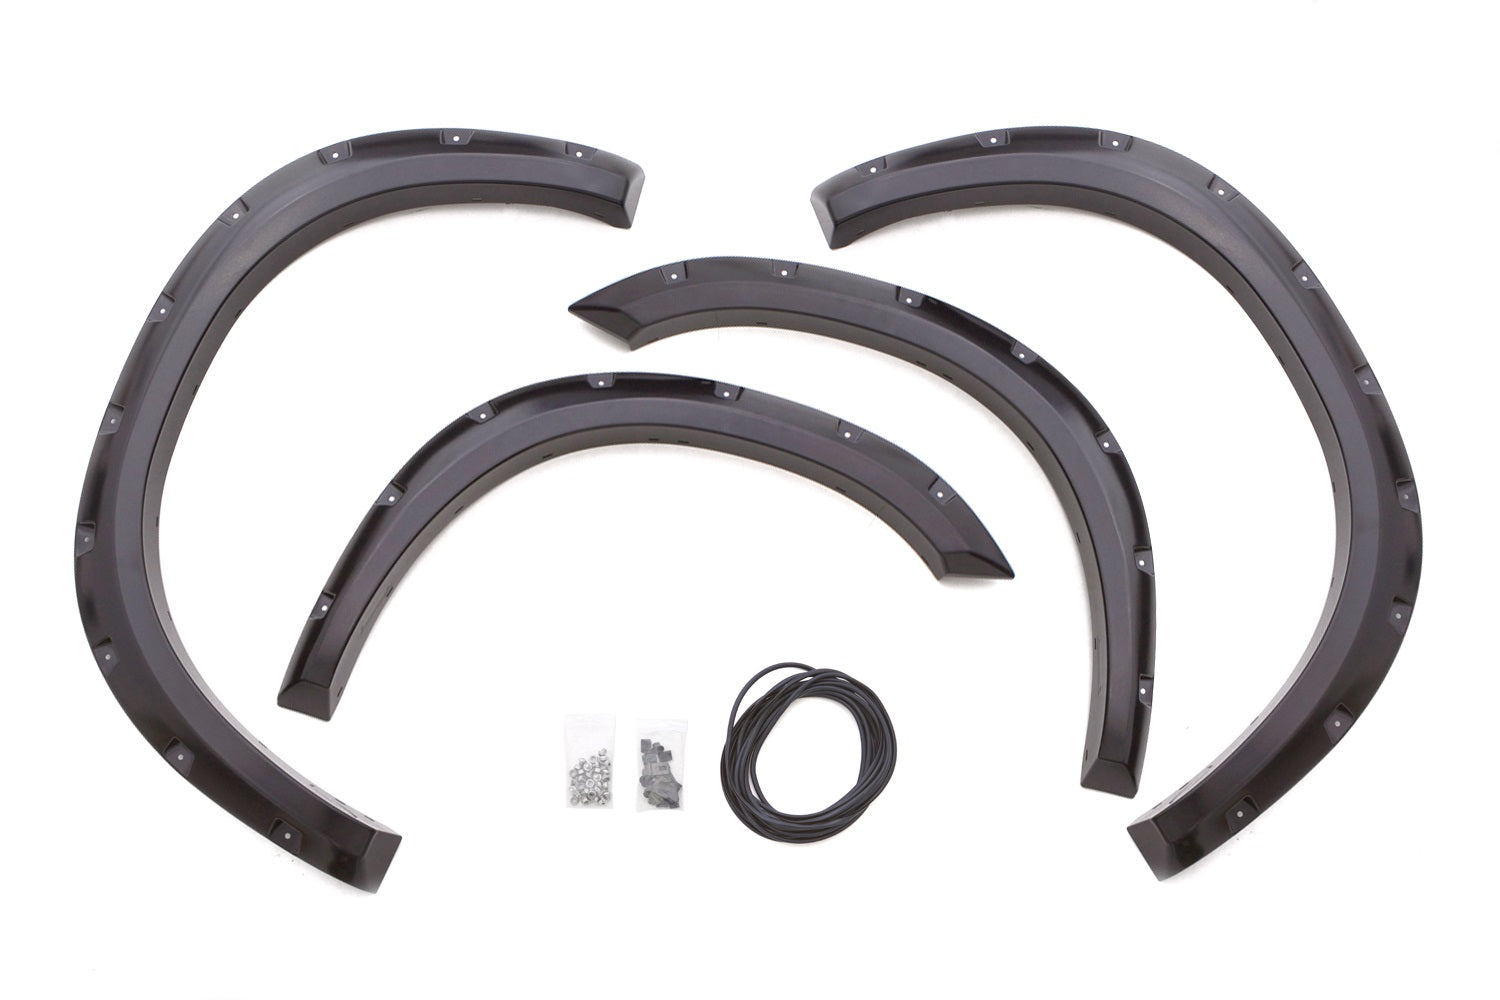 Lund RX204S Rivet Style Fender Flare Set Fits 09-22 1500 1500 Classic Ram 1500